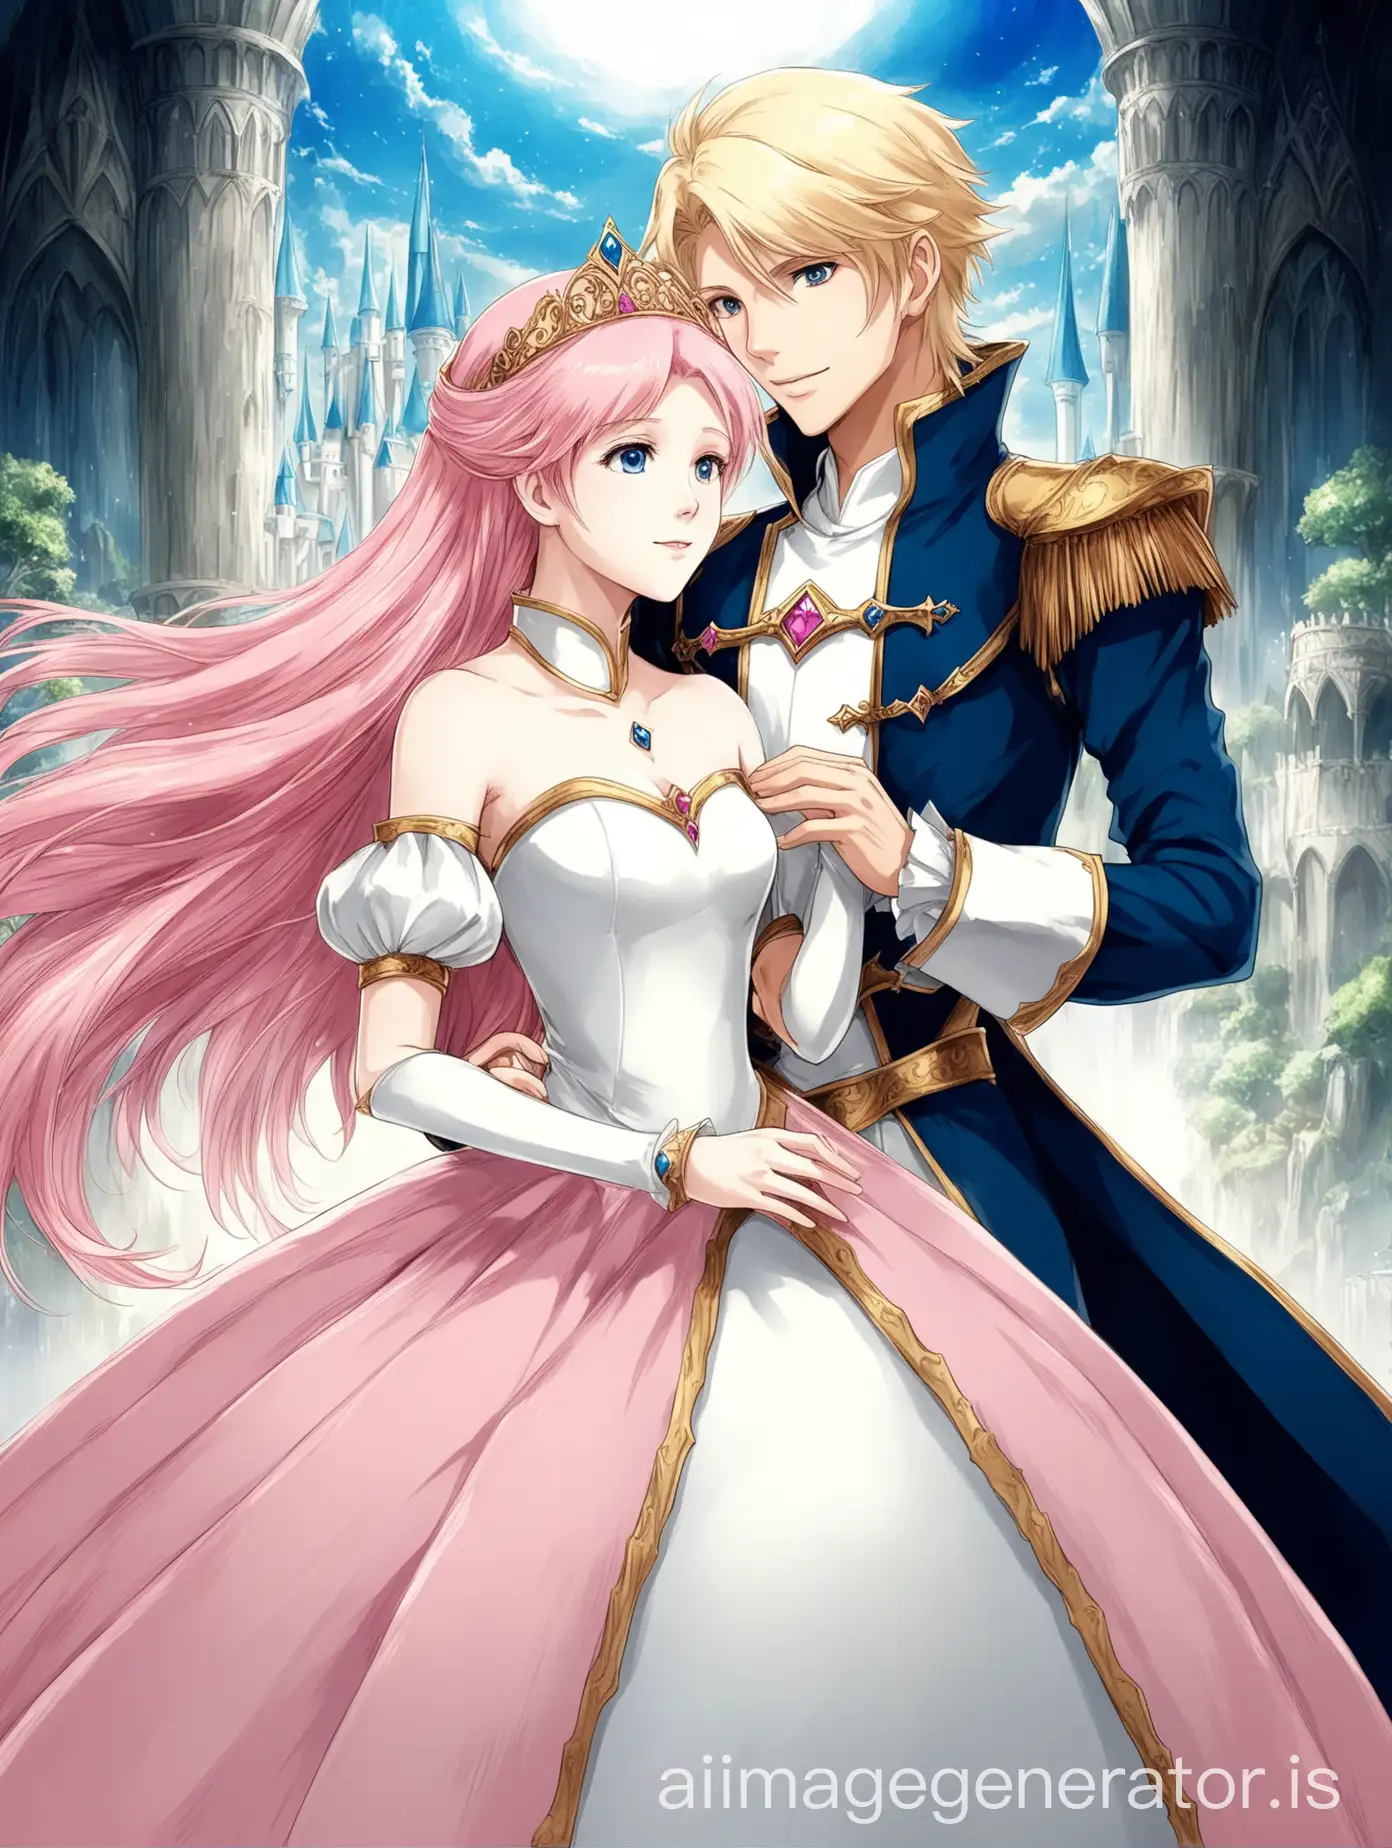 FairSkinned-Anime-Princess-and-BlondHaired-Prince-in-a-Fantasy-World